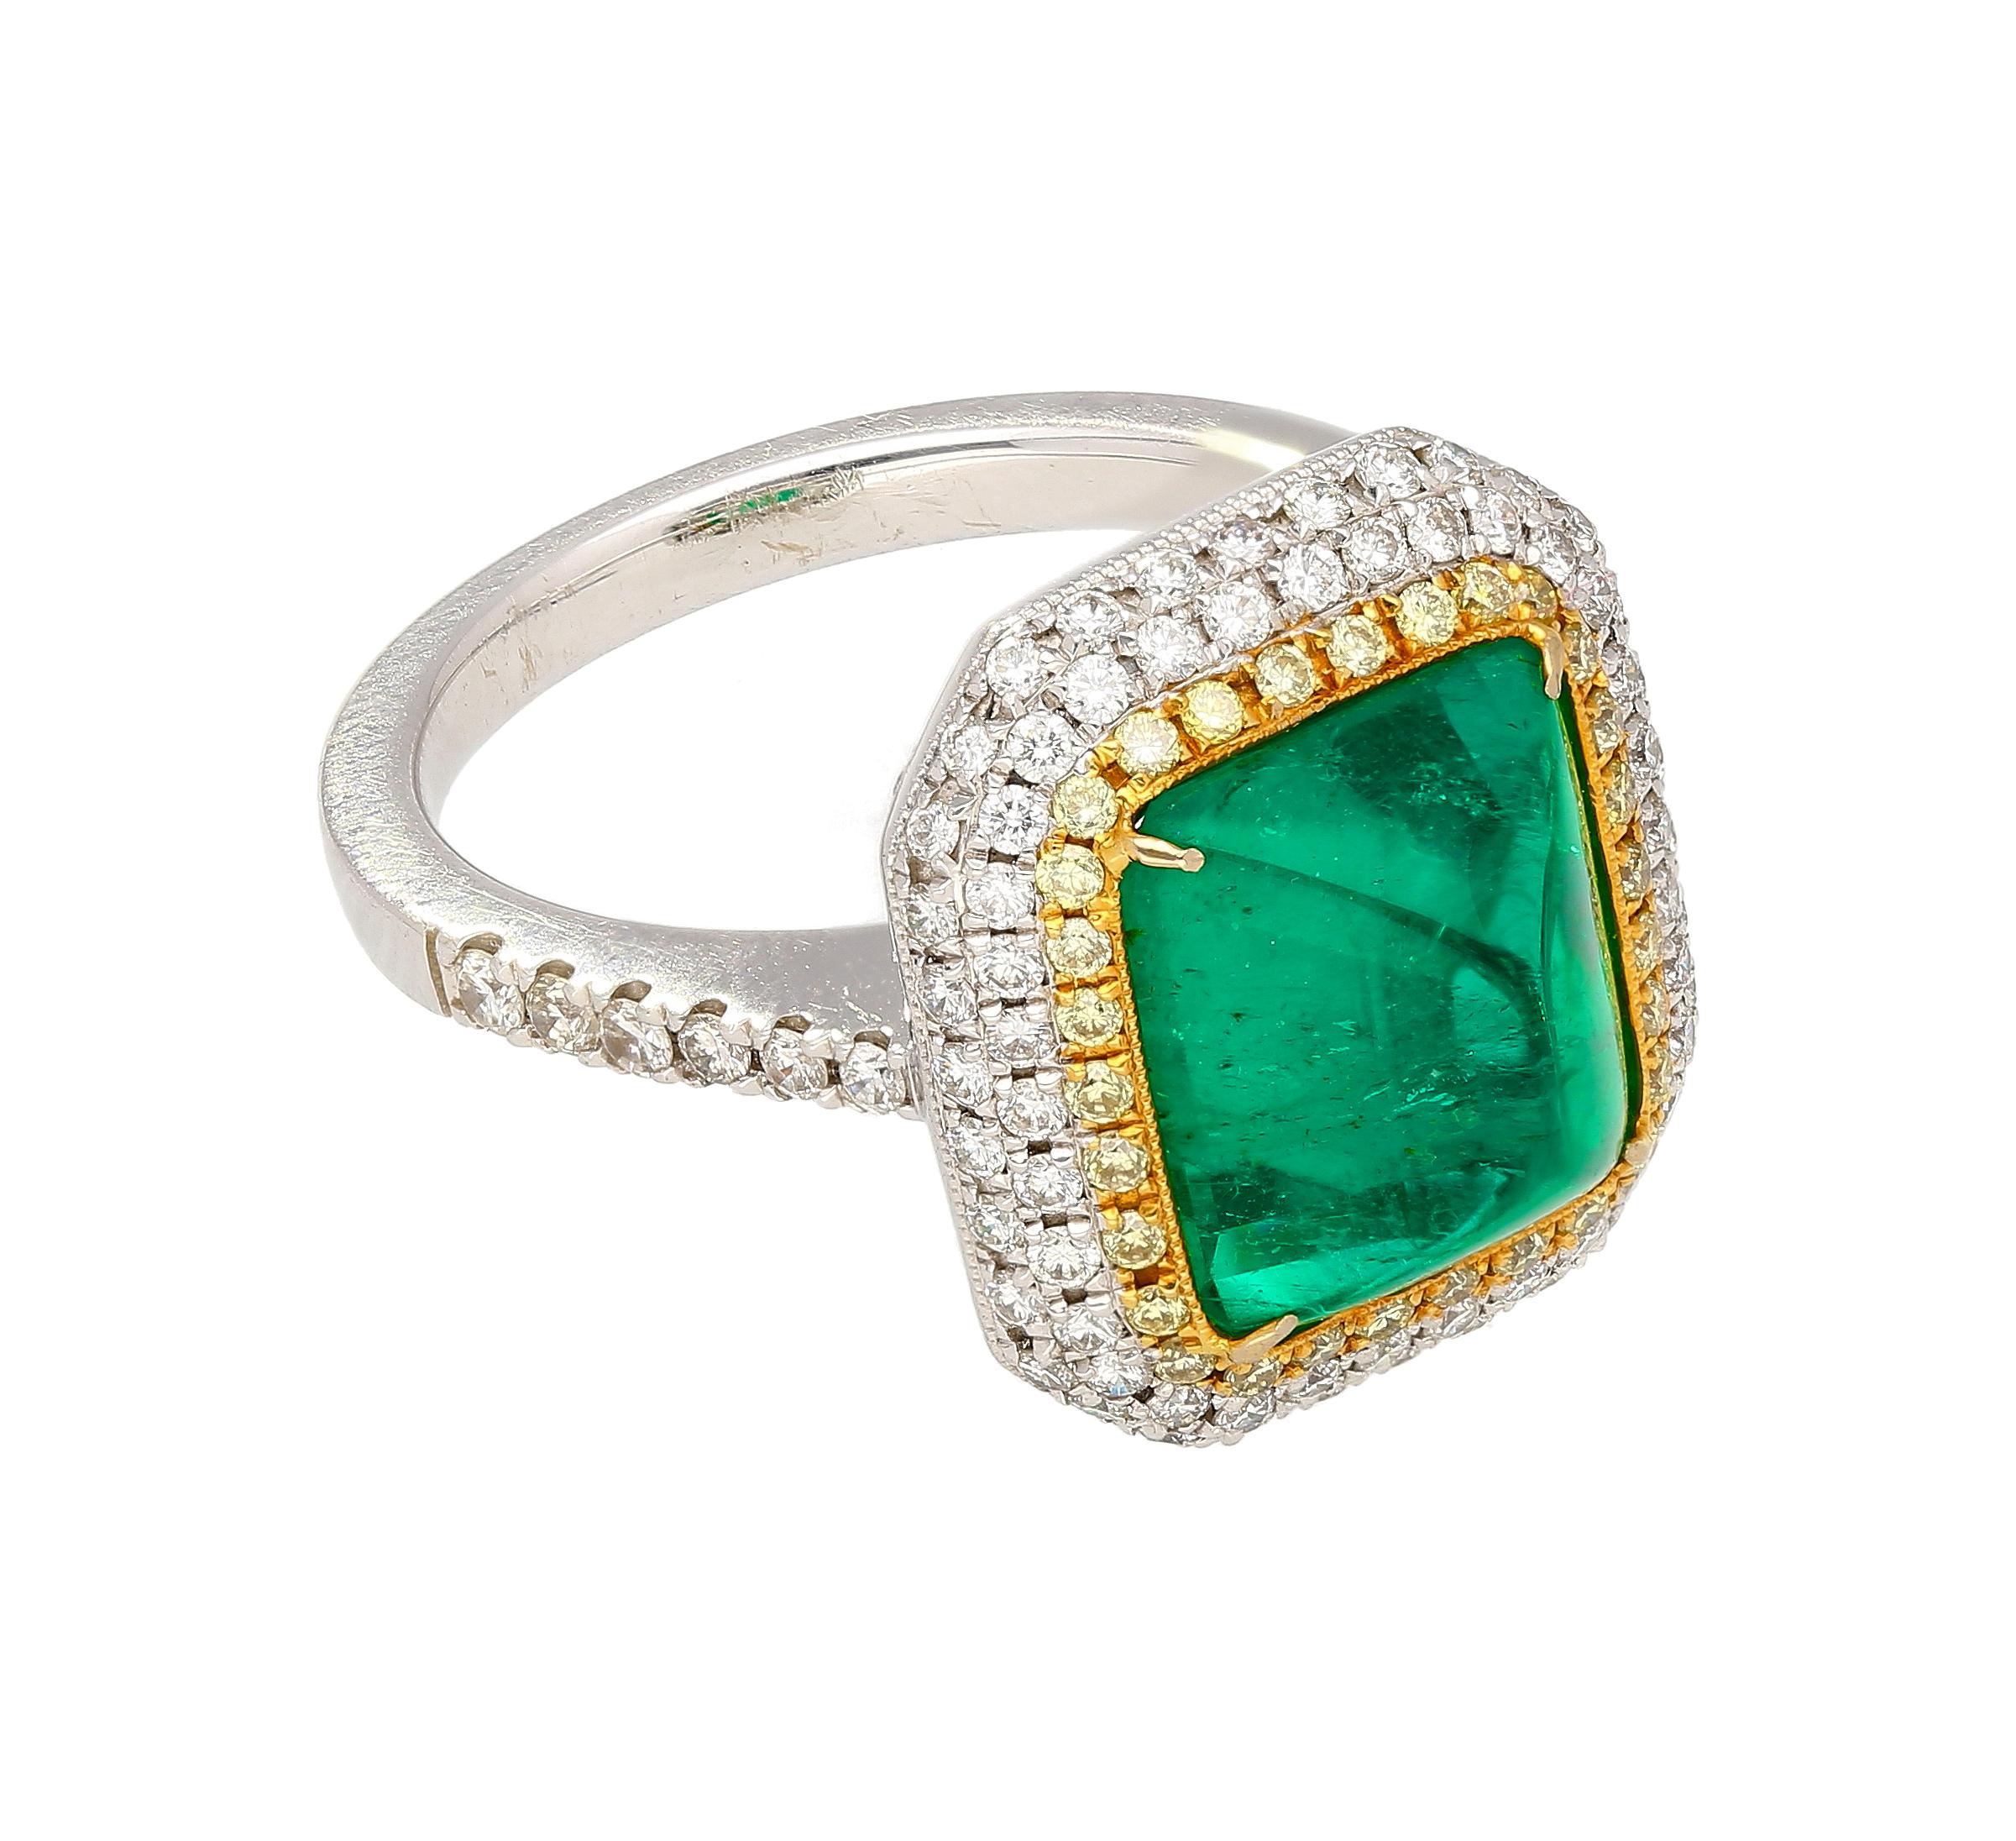 Art Deco 4.49 Carat Sugarloaf Cabochon Cut Colombian Emerald and Double Diamond Halo Ring For Sale